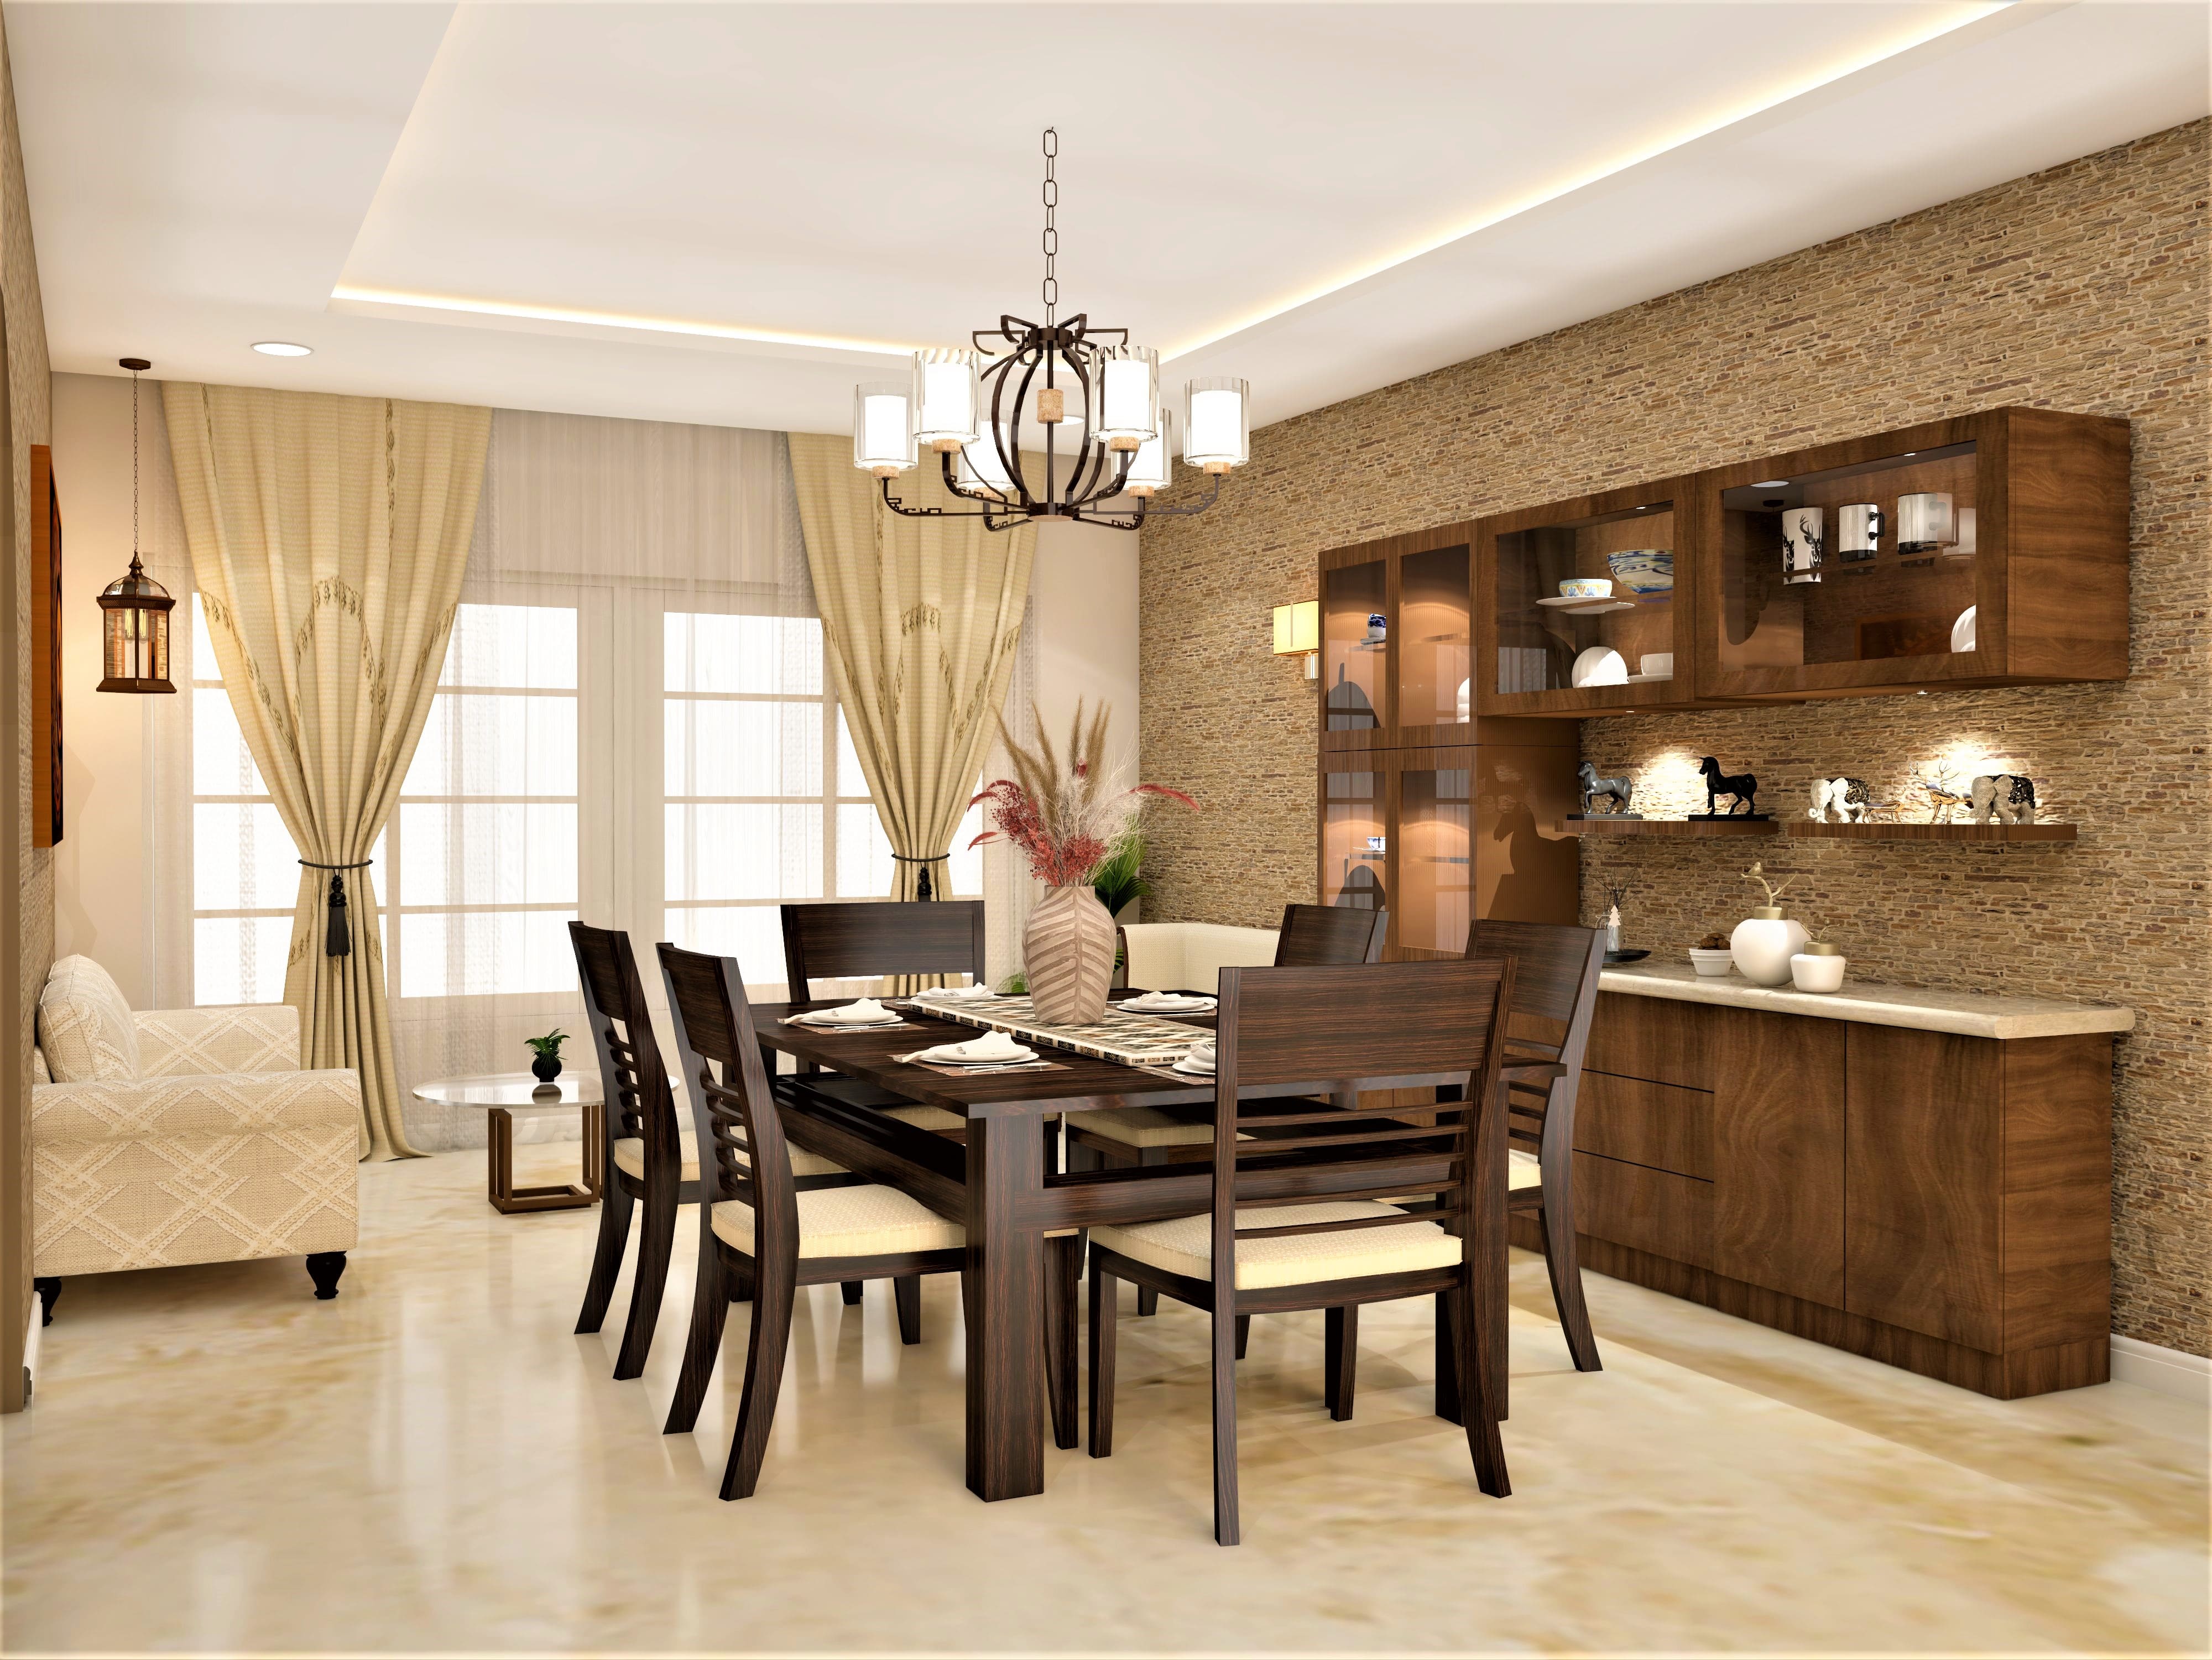 Indian dining room design perfect for a large family - Beautiful Homes